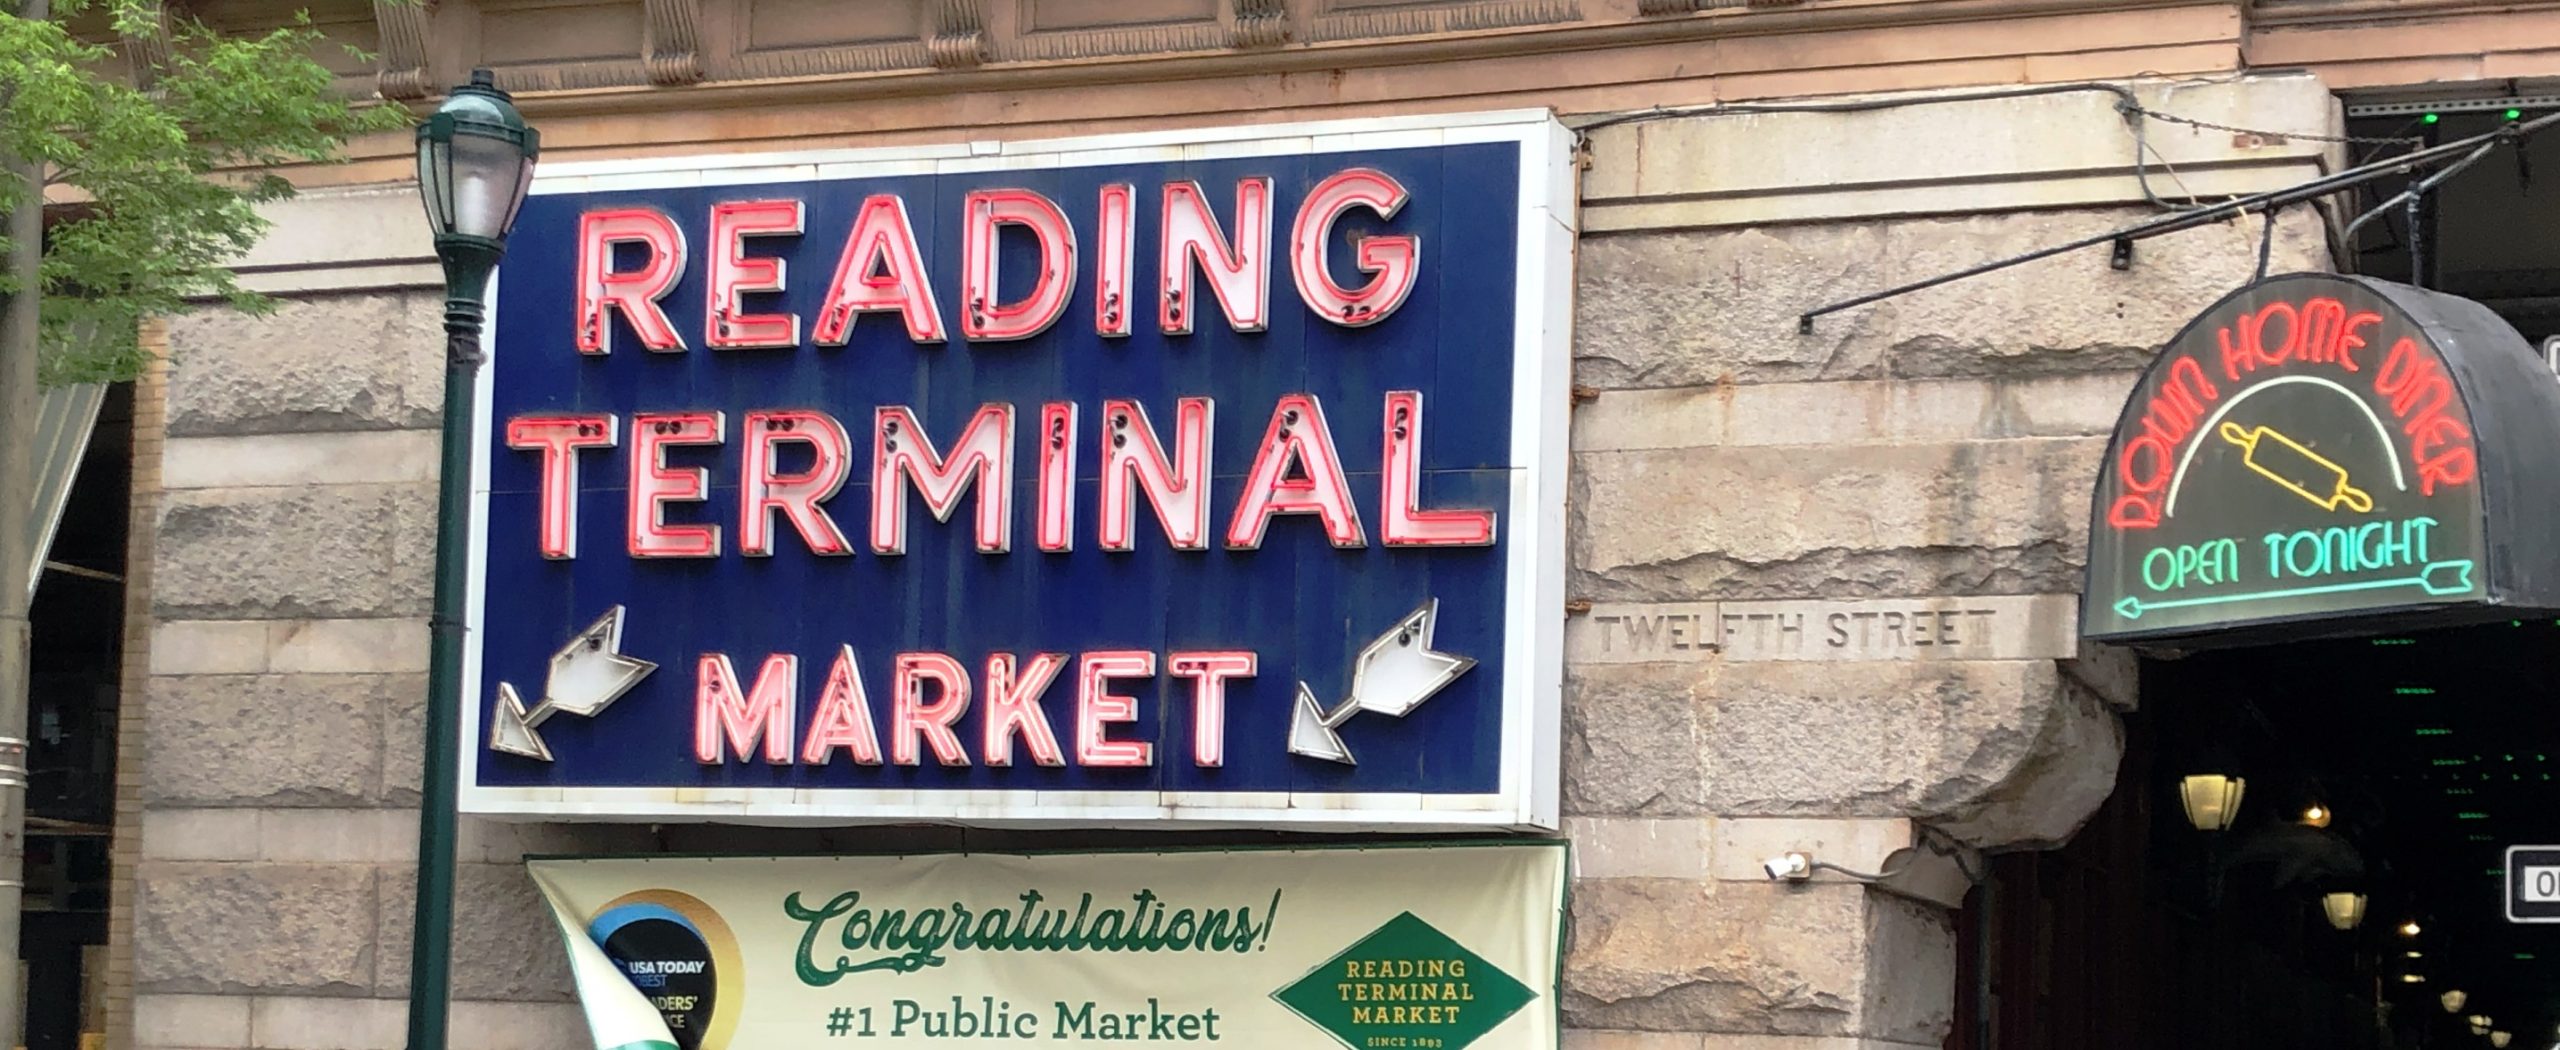 The Resilient Reading Terminal Market